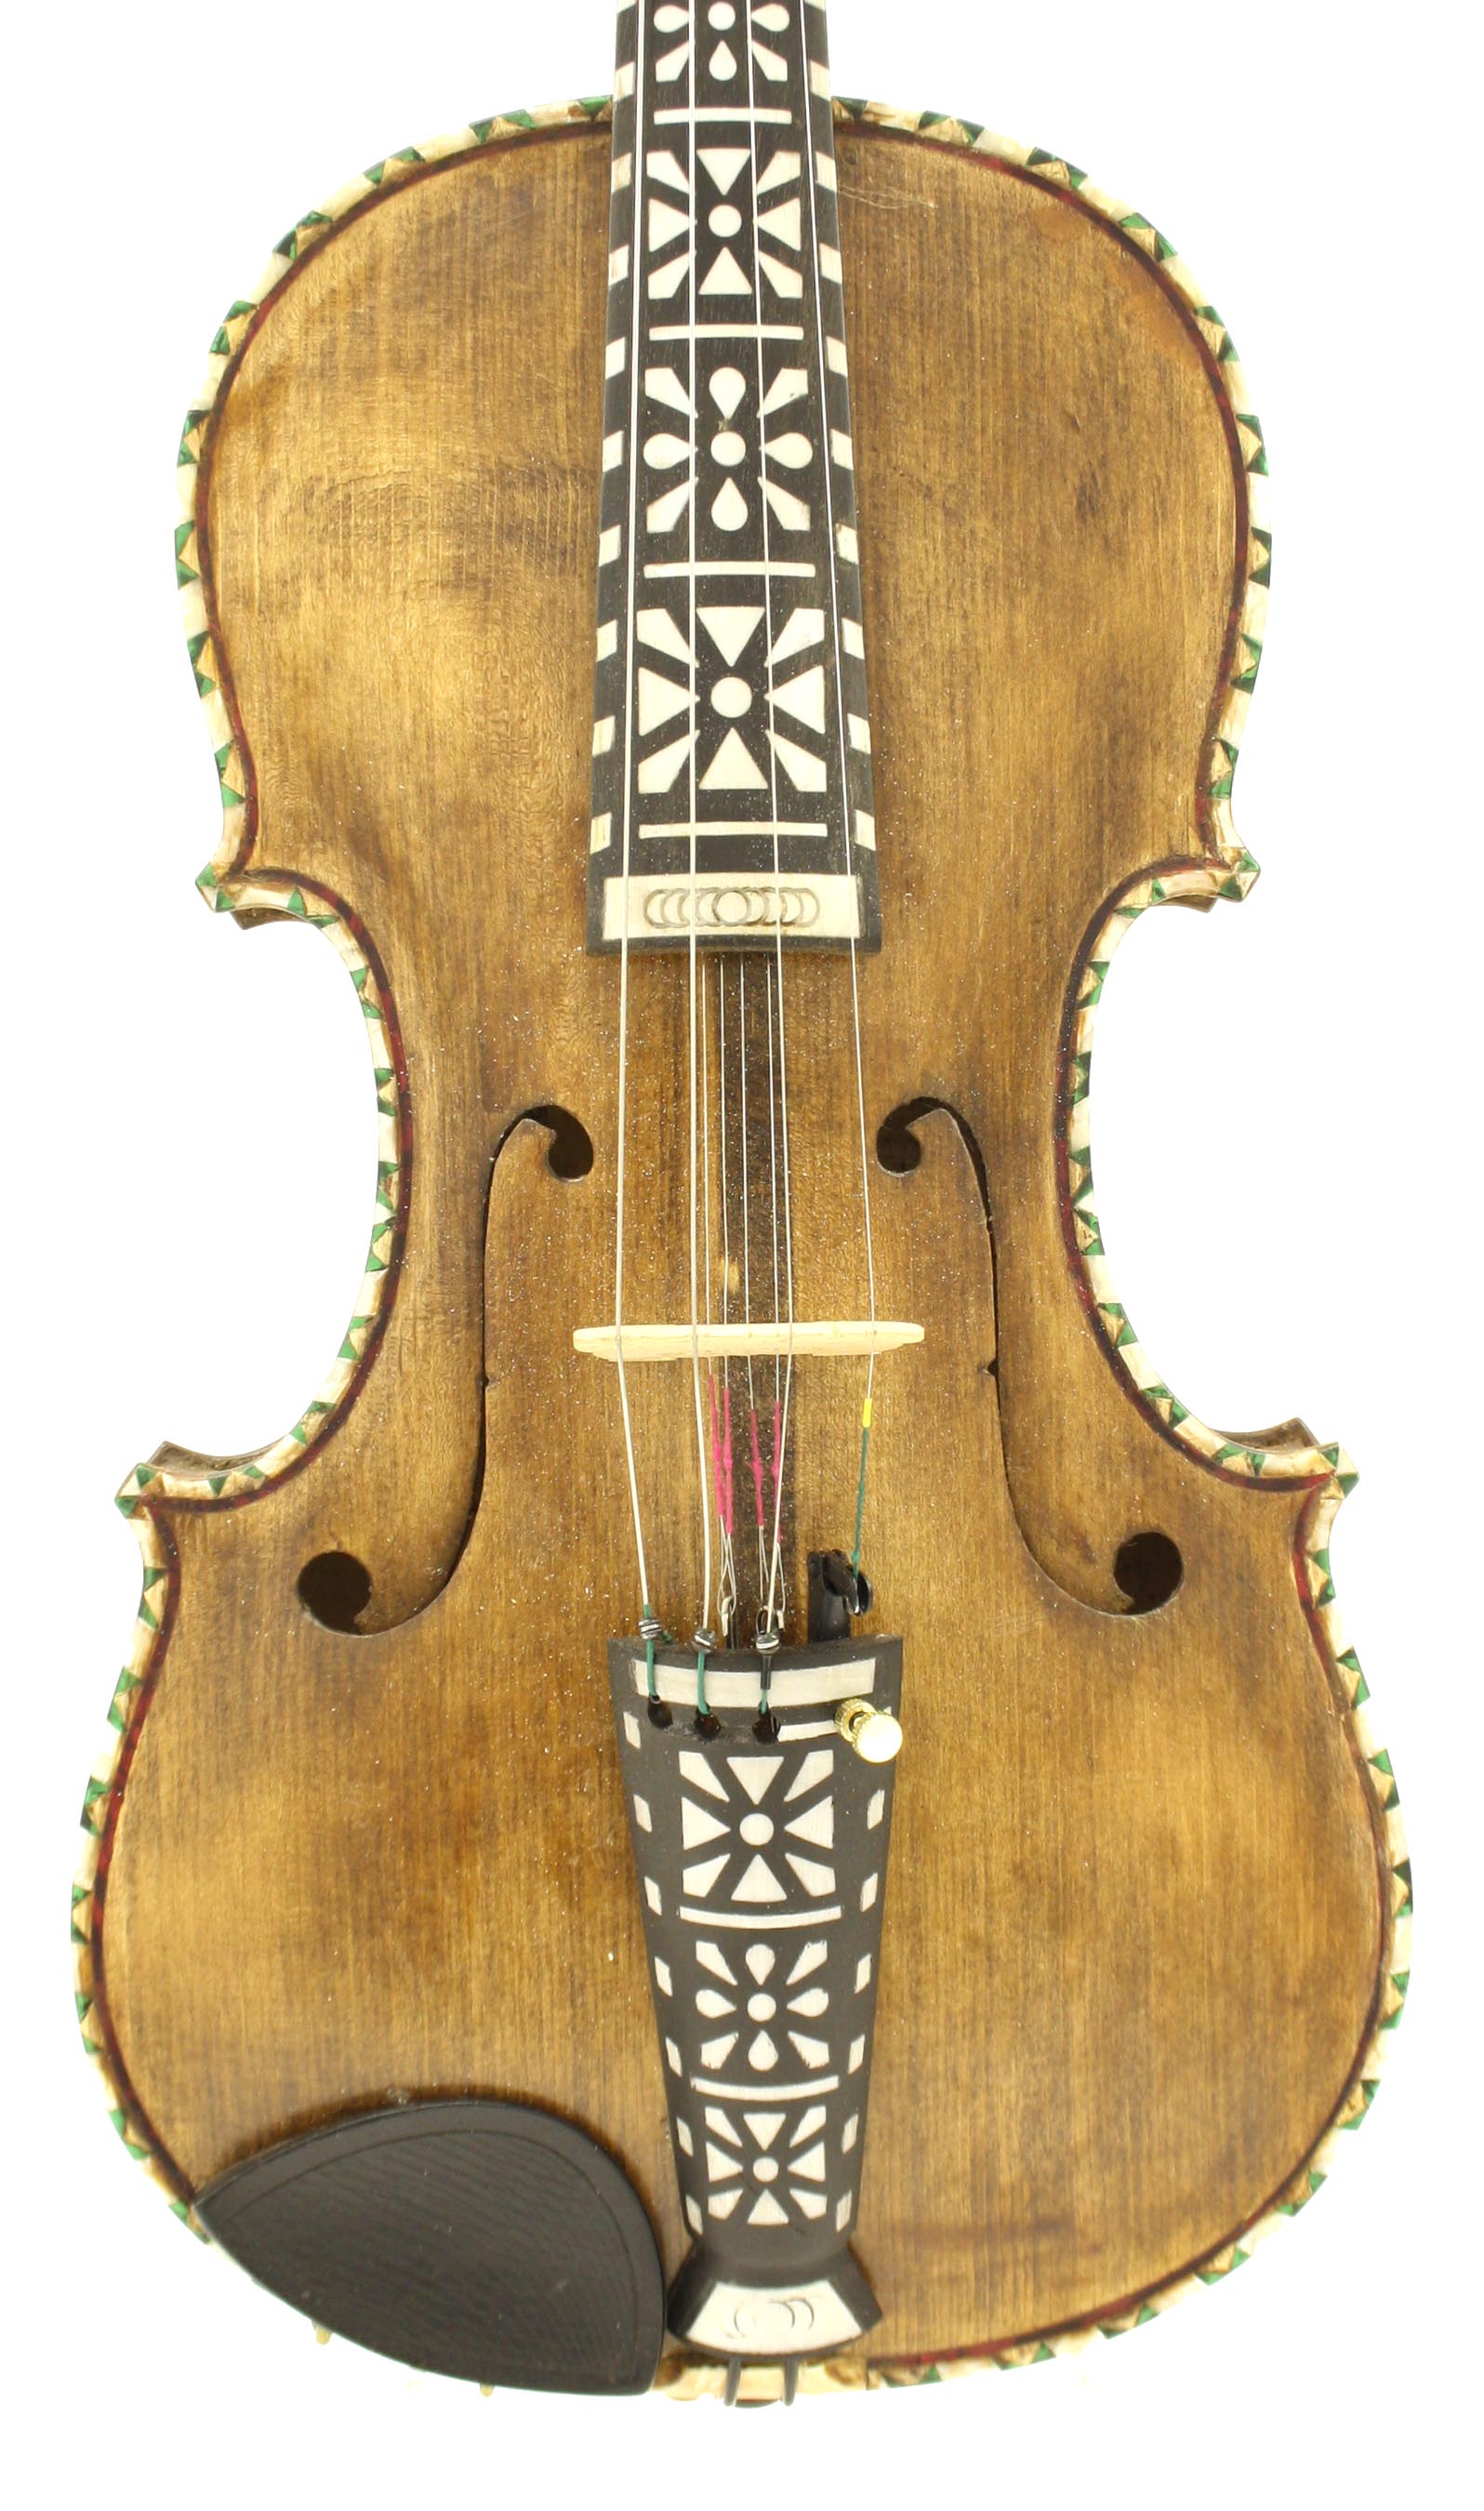 19th century Scandinavian Hardanger violin, with decorative mother of pearl bandings and geometric